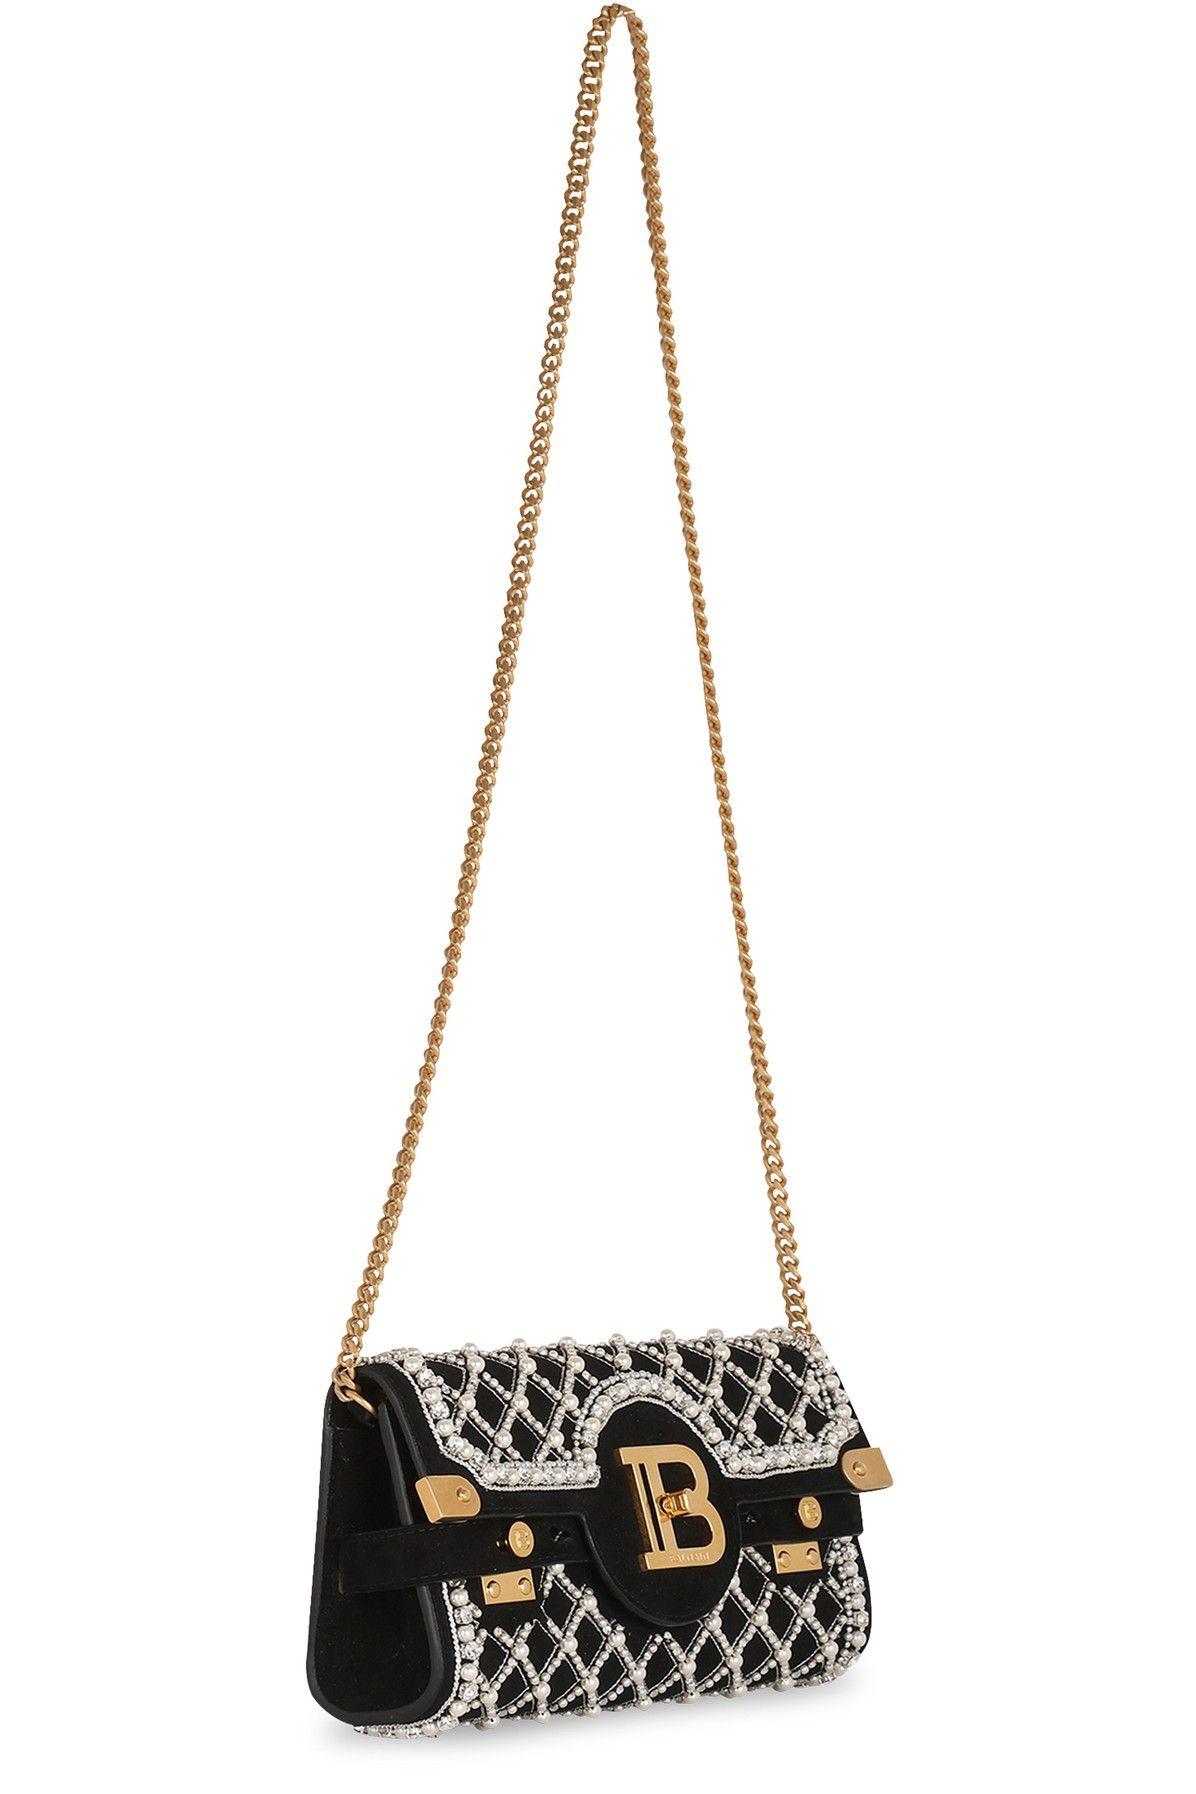 Balmain B-buzz 23 Clutch Bag With Embroidery in Black | Lyst